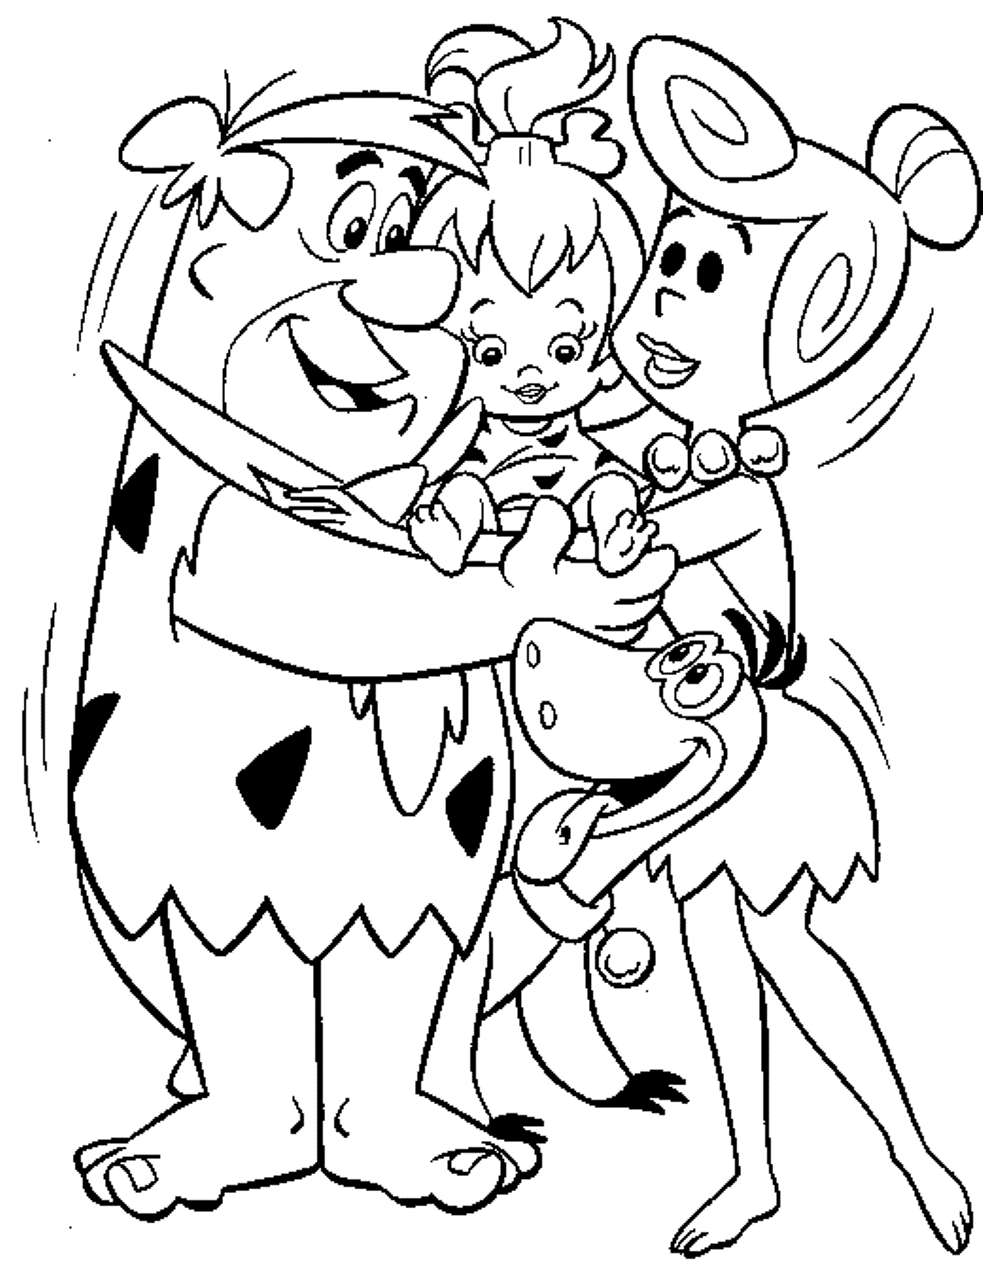 The Flintstones Cartoon Coloring Pages | Cartoon Coloring pages of ...